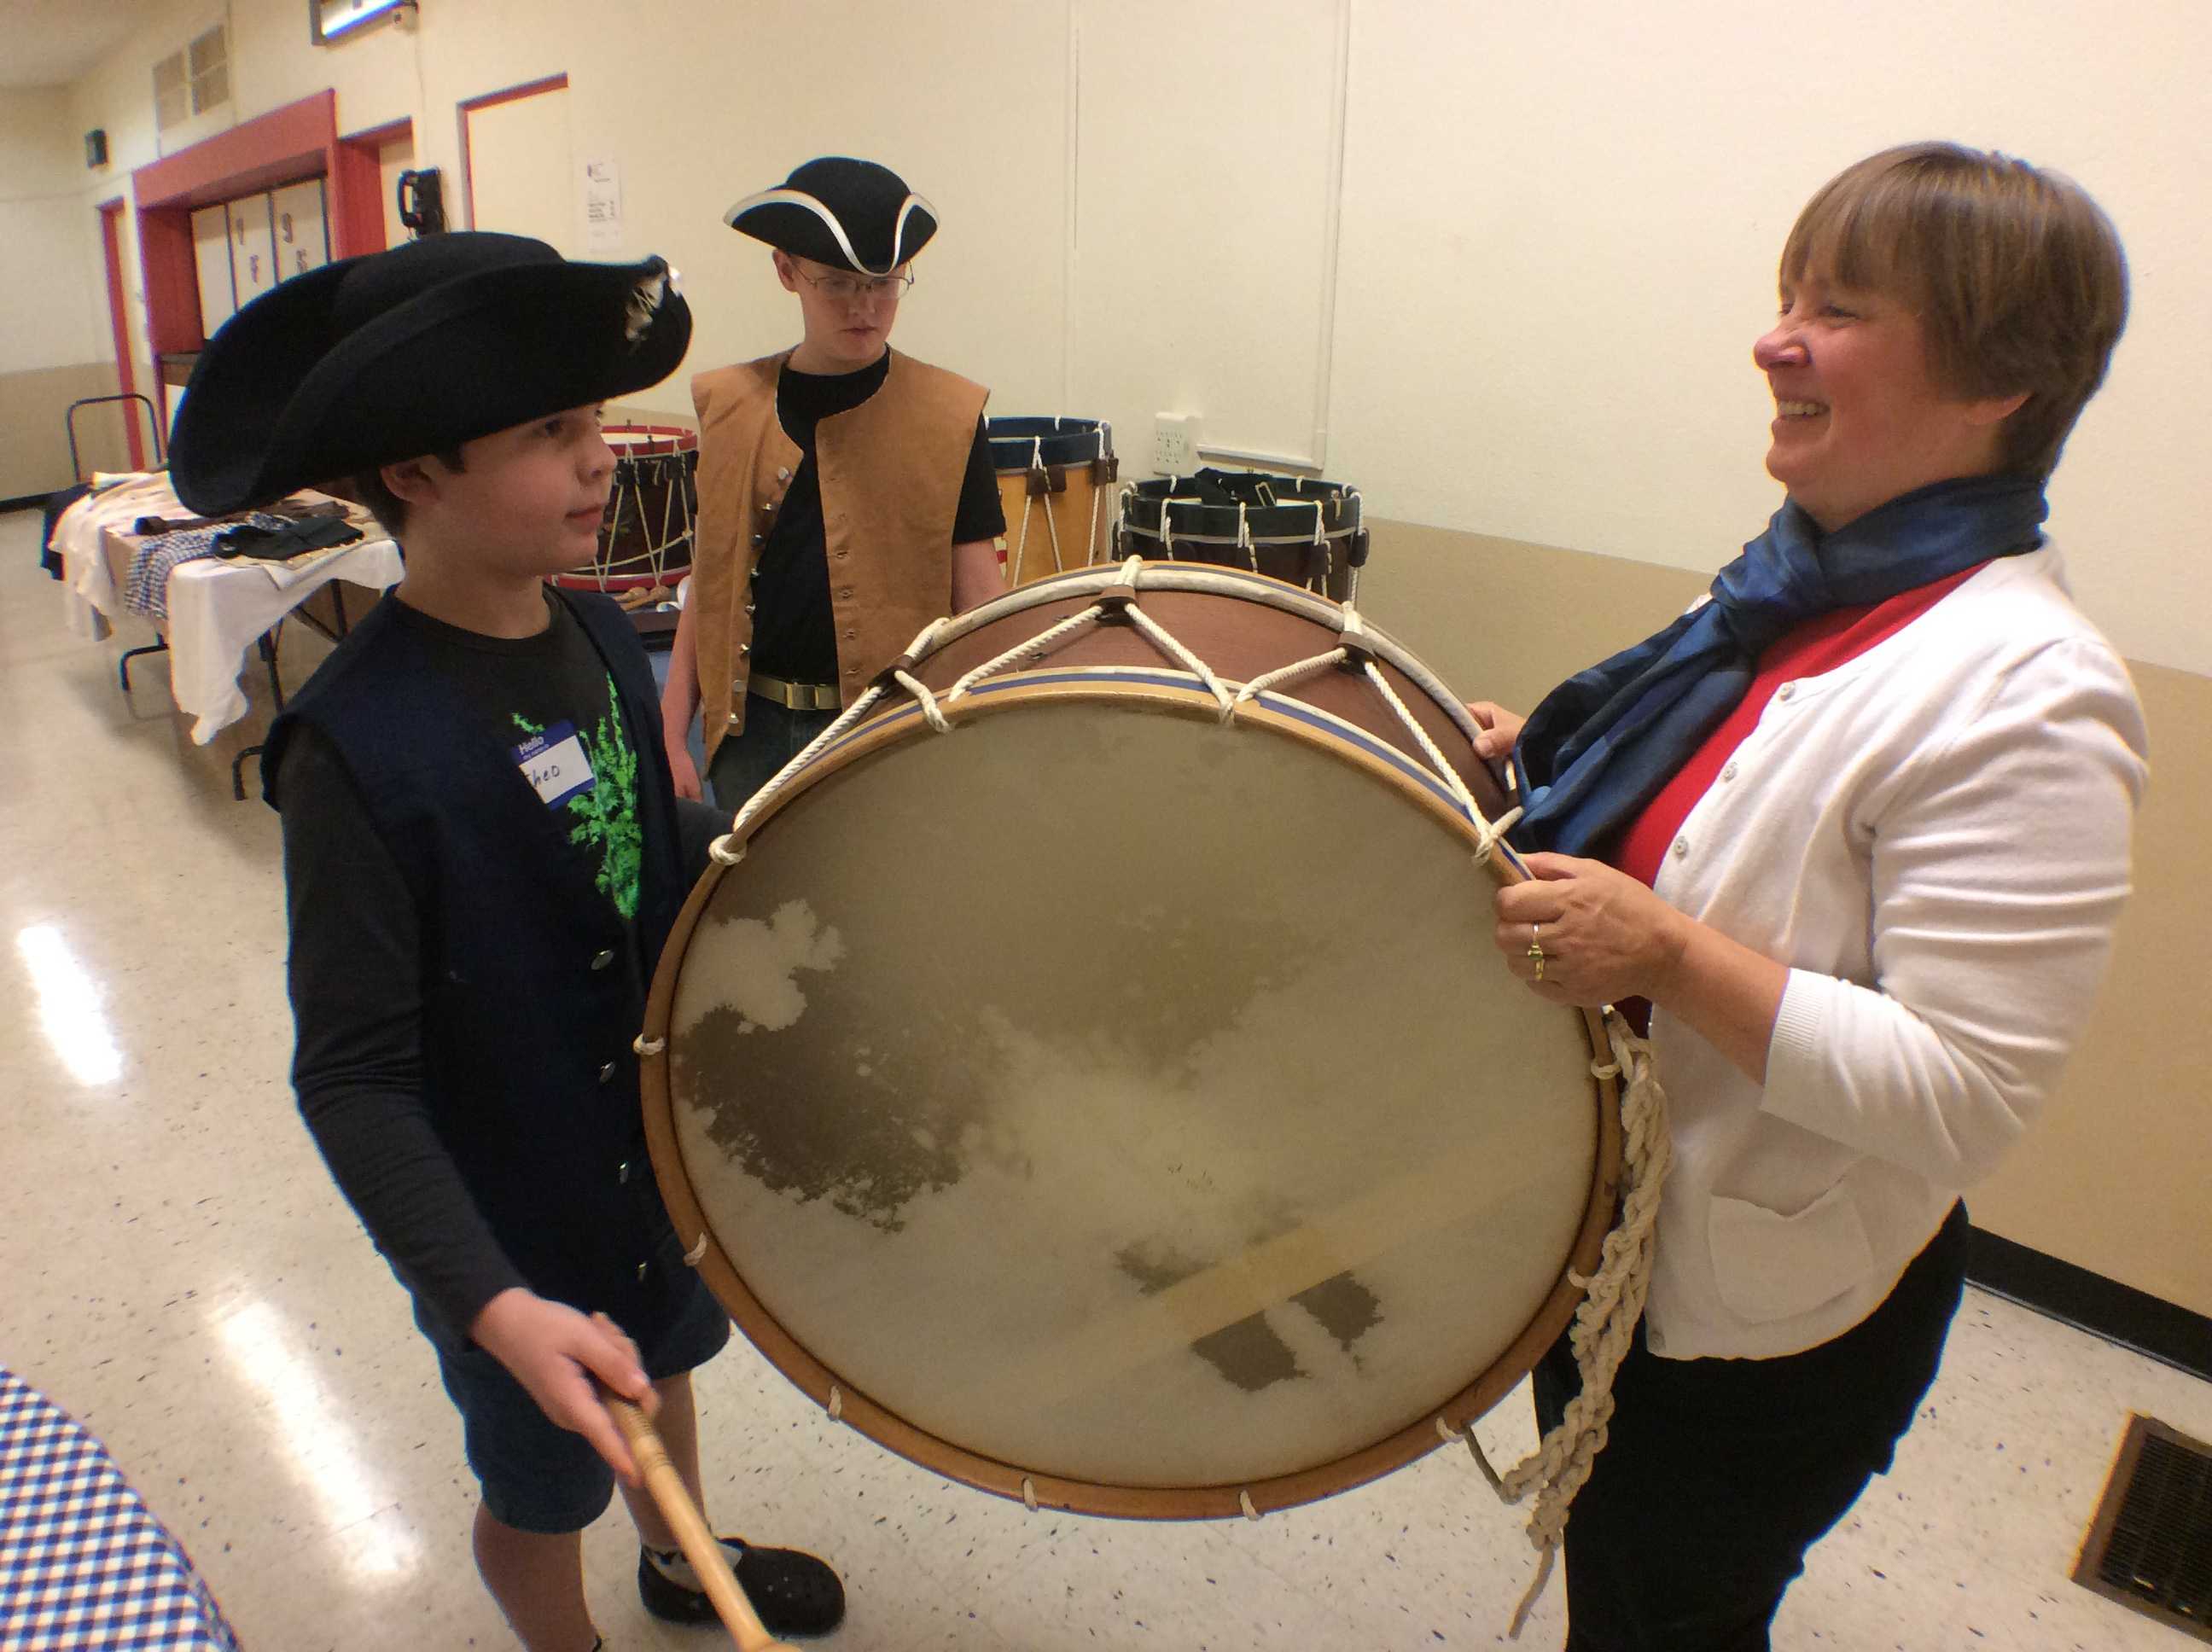 Tanya Morrisett shows off the rope-tension base drum at an open house event. (Photo/Danielle Lee)